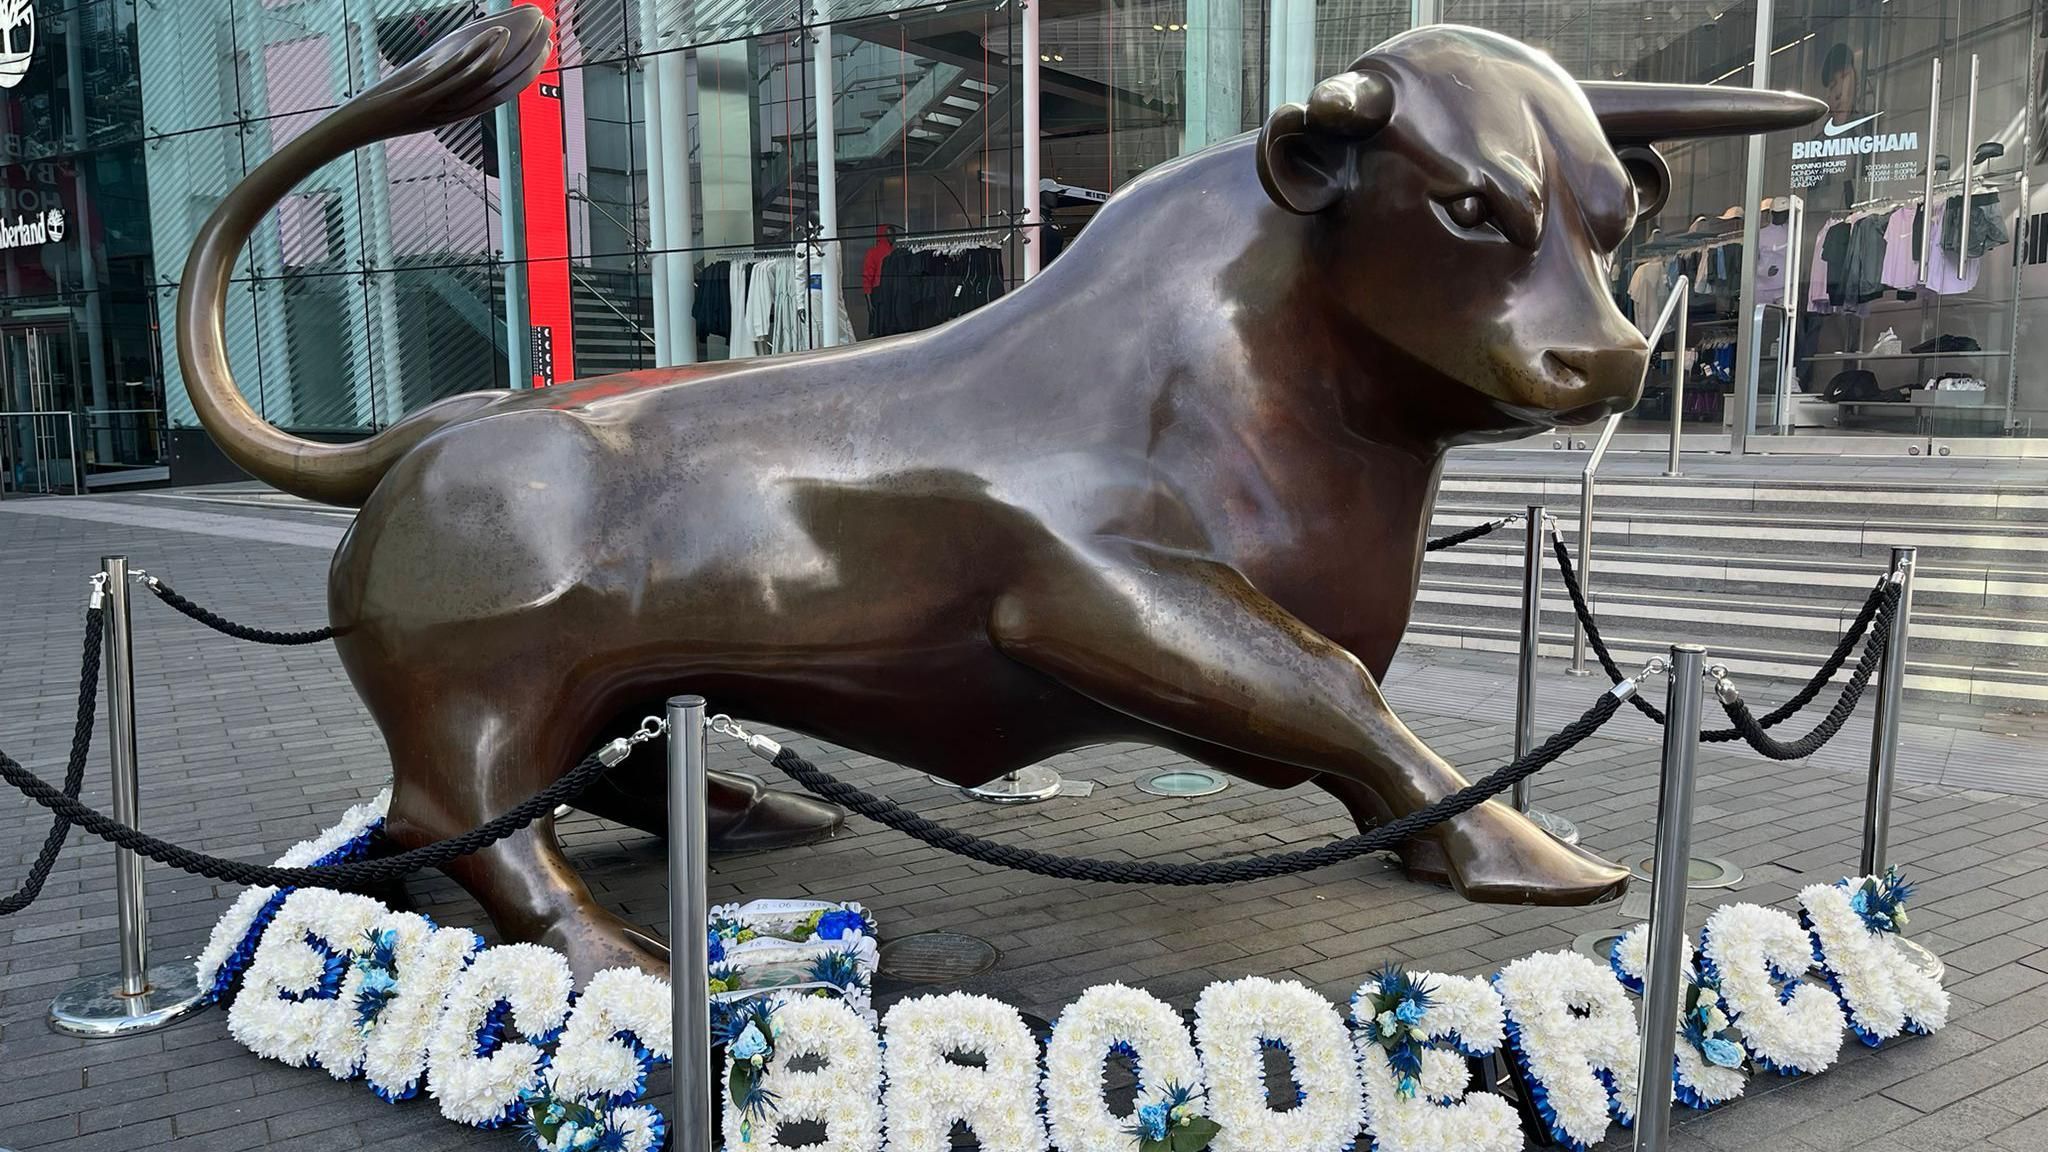 Tributes appeared at Birmingham's bull statue on Friday